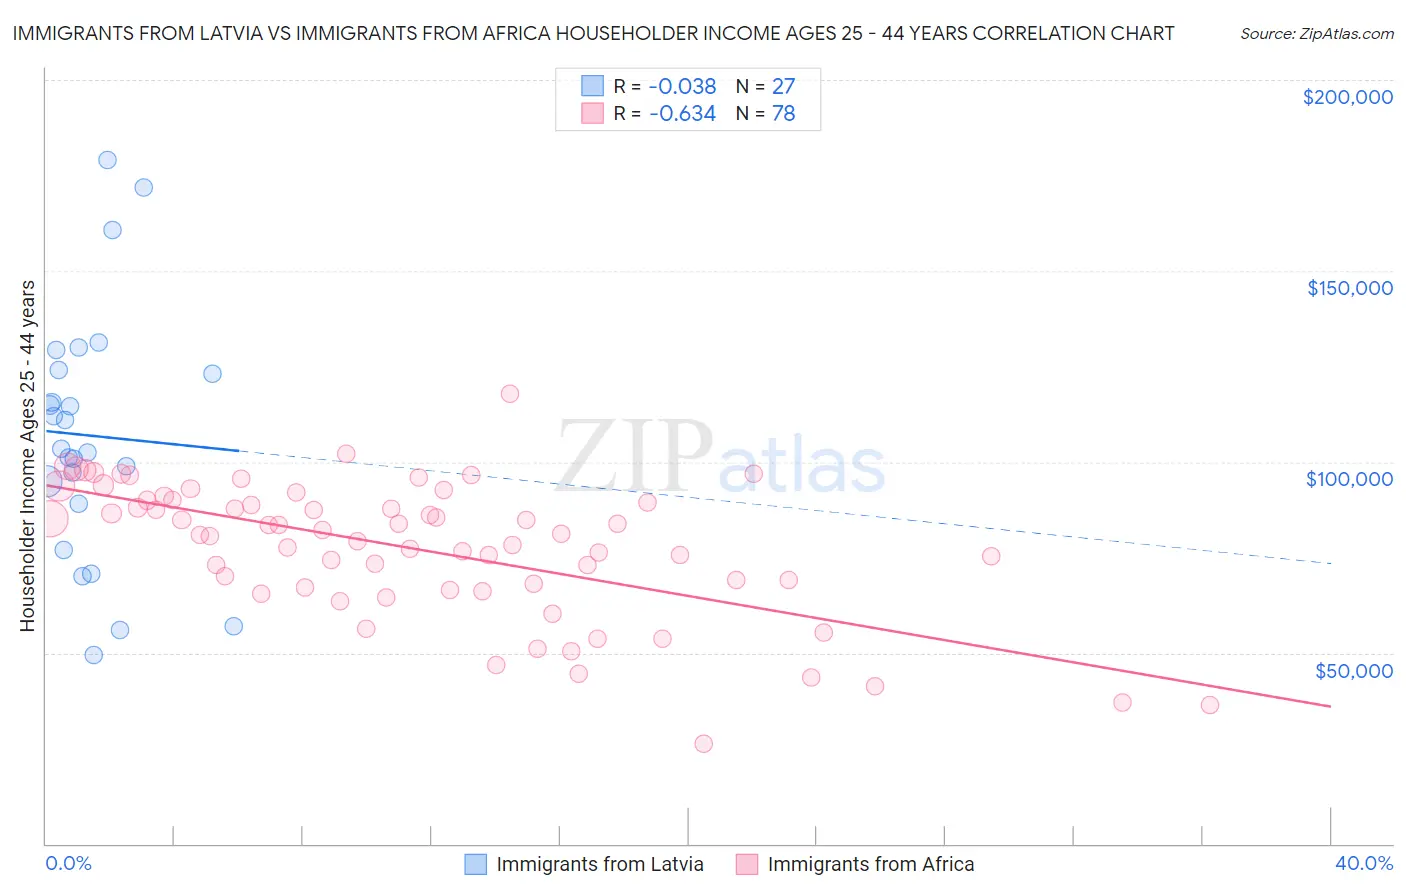 Immigrants from Latvia vs Immigrants from Africa Householder Income Ages 25 - 44 years